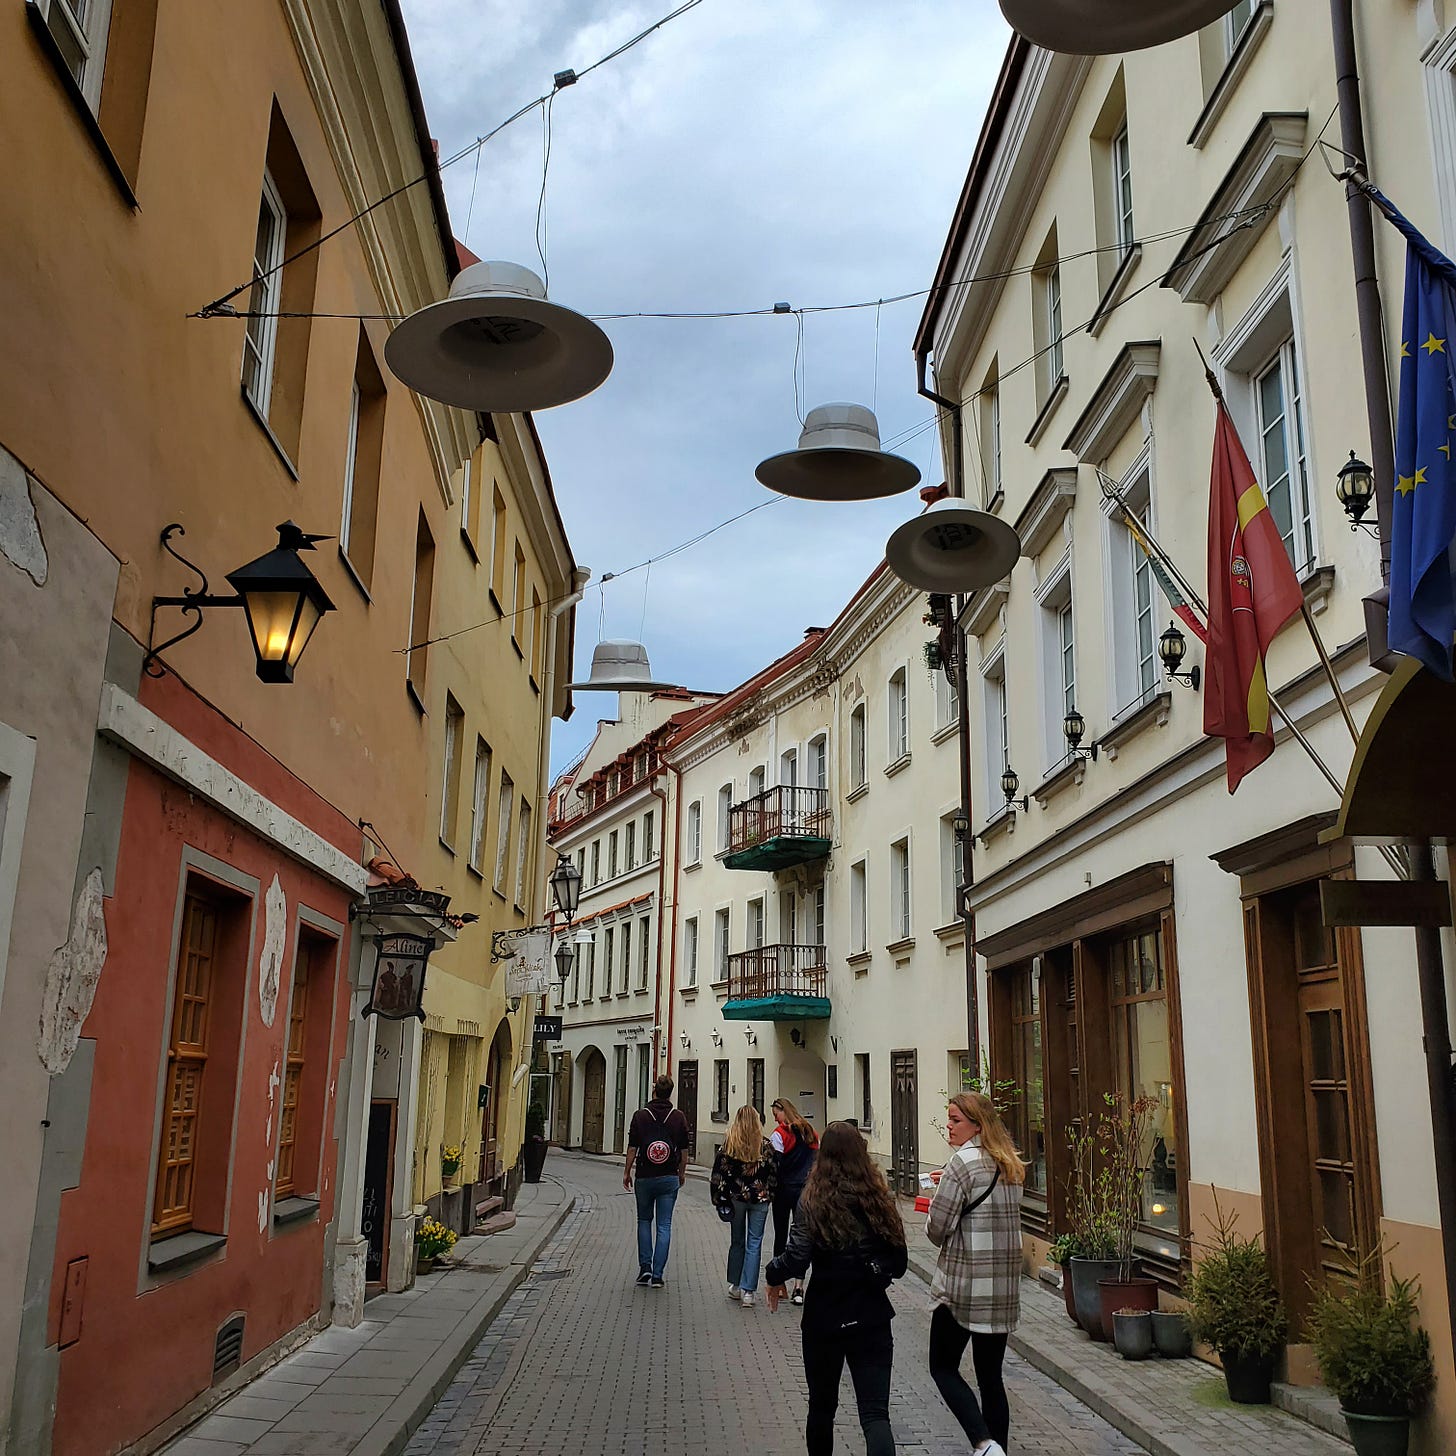 A small European city streets over which decorate hats hang on wires.